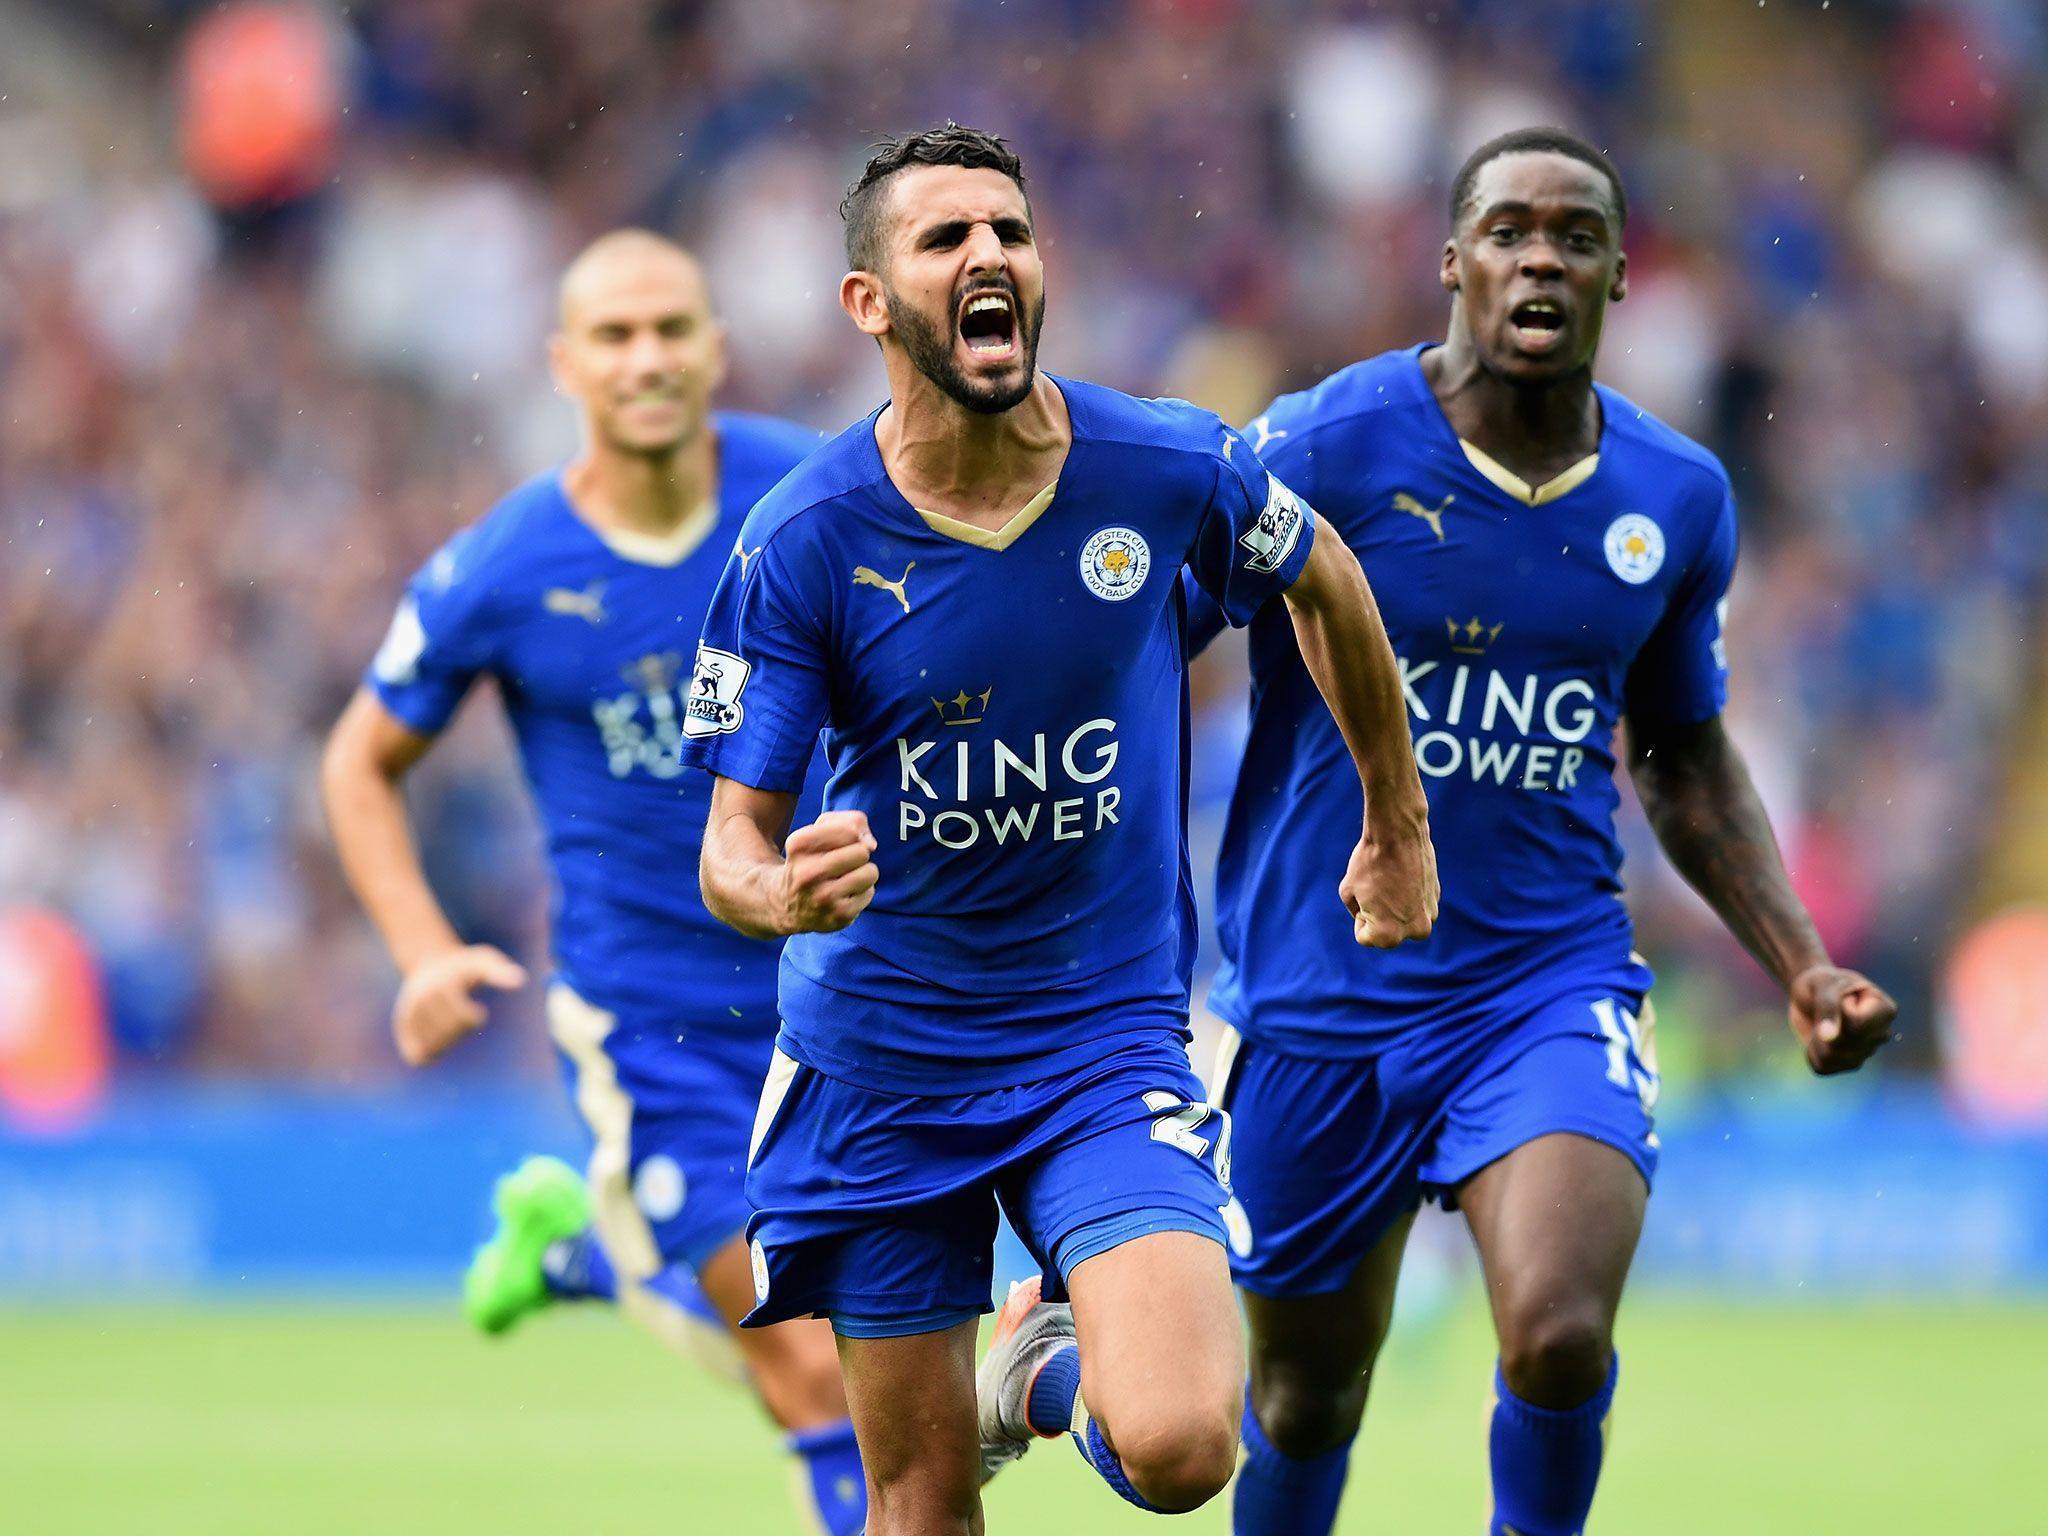 Norwich vs Leicester preview: What time does it start and where